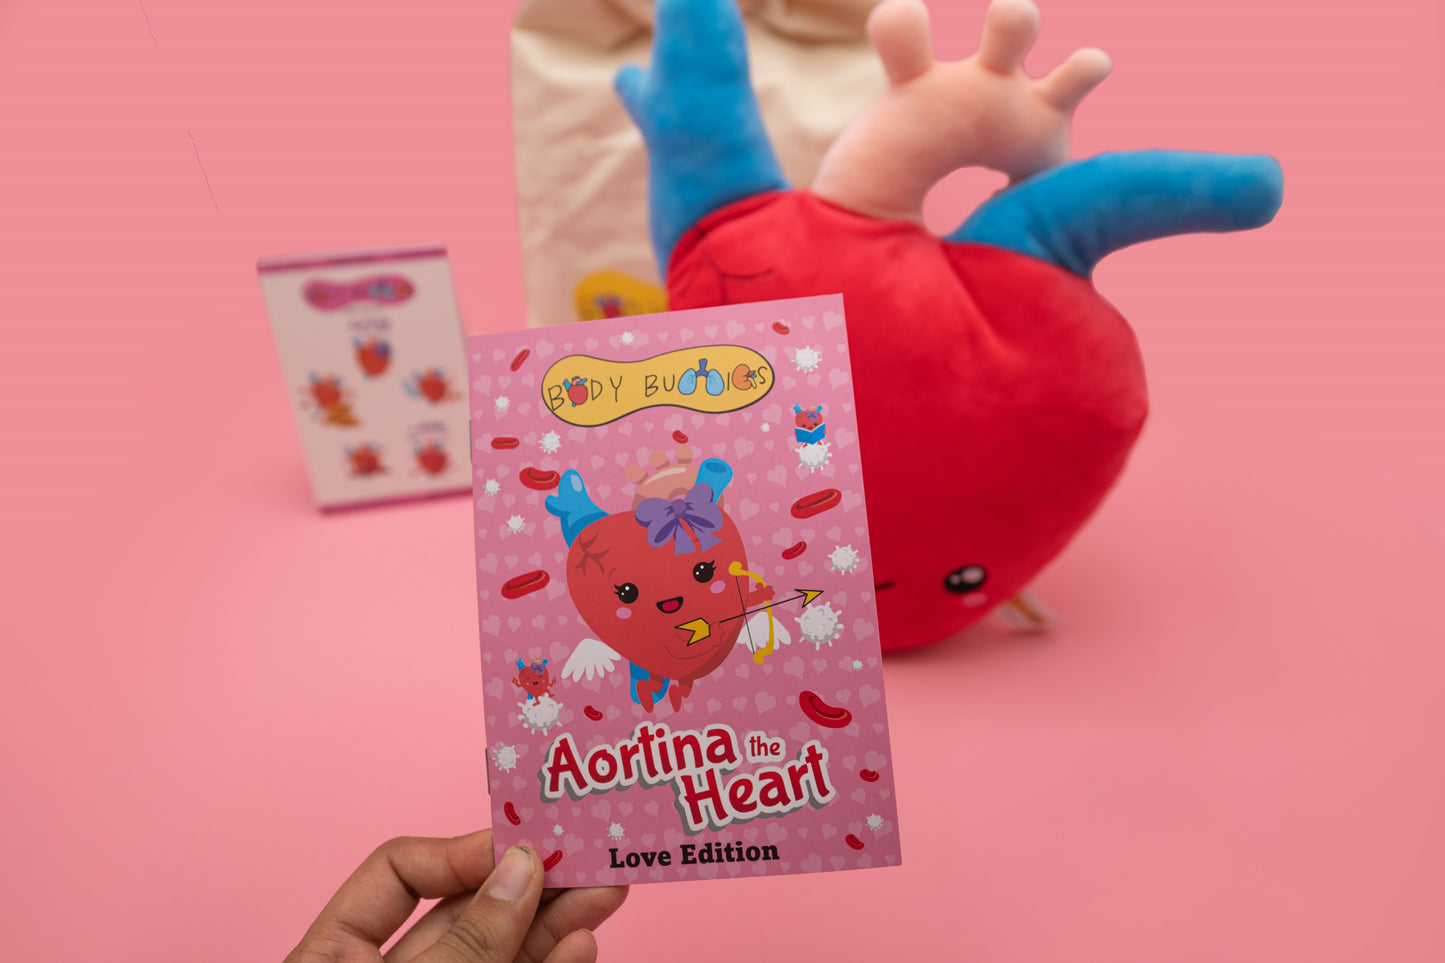 Limited Love Edition: Aortina the Heart Plushie